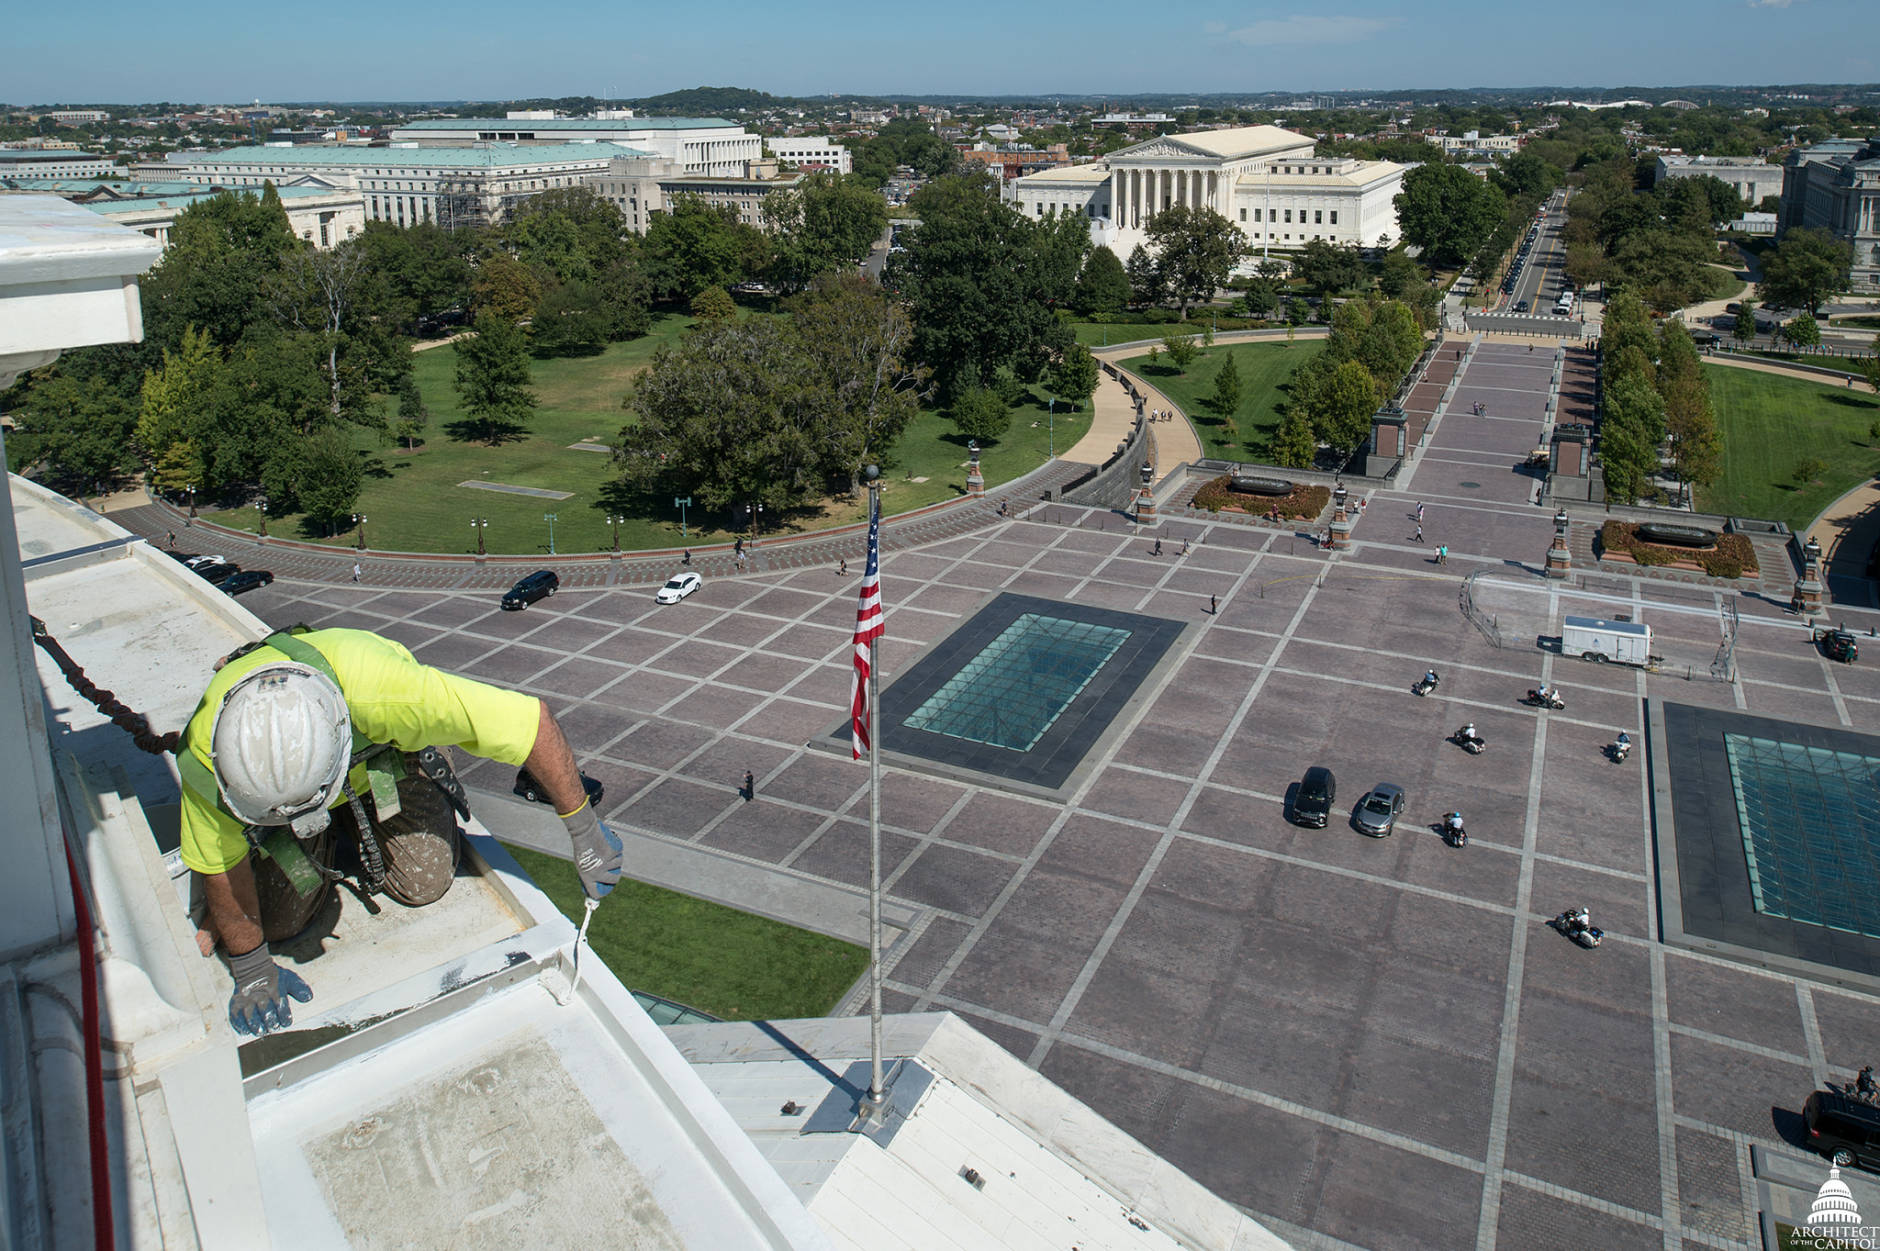 View from the top. A workman carefully works above the U.S. Capitol grounds (Architect of the Capitol)